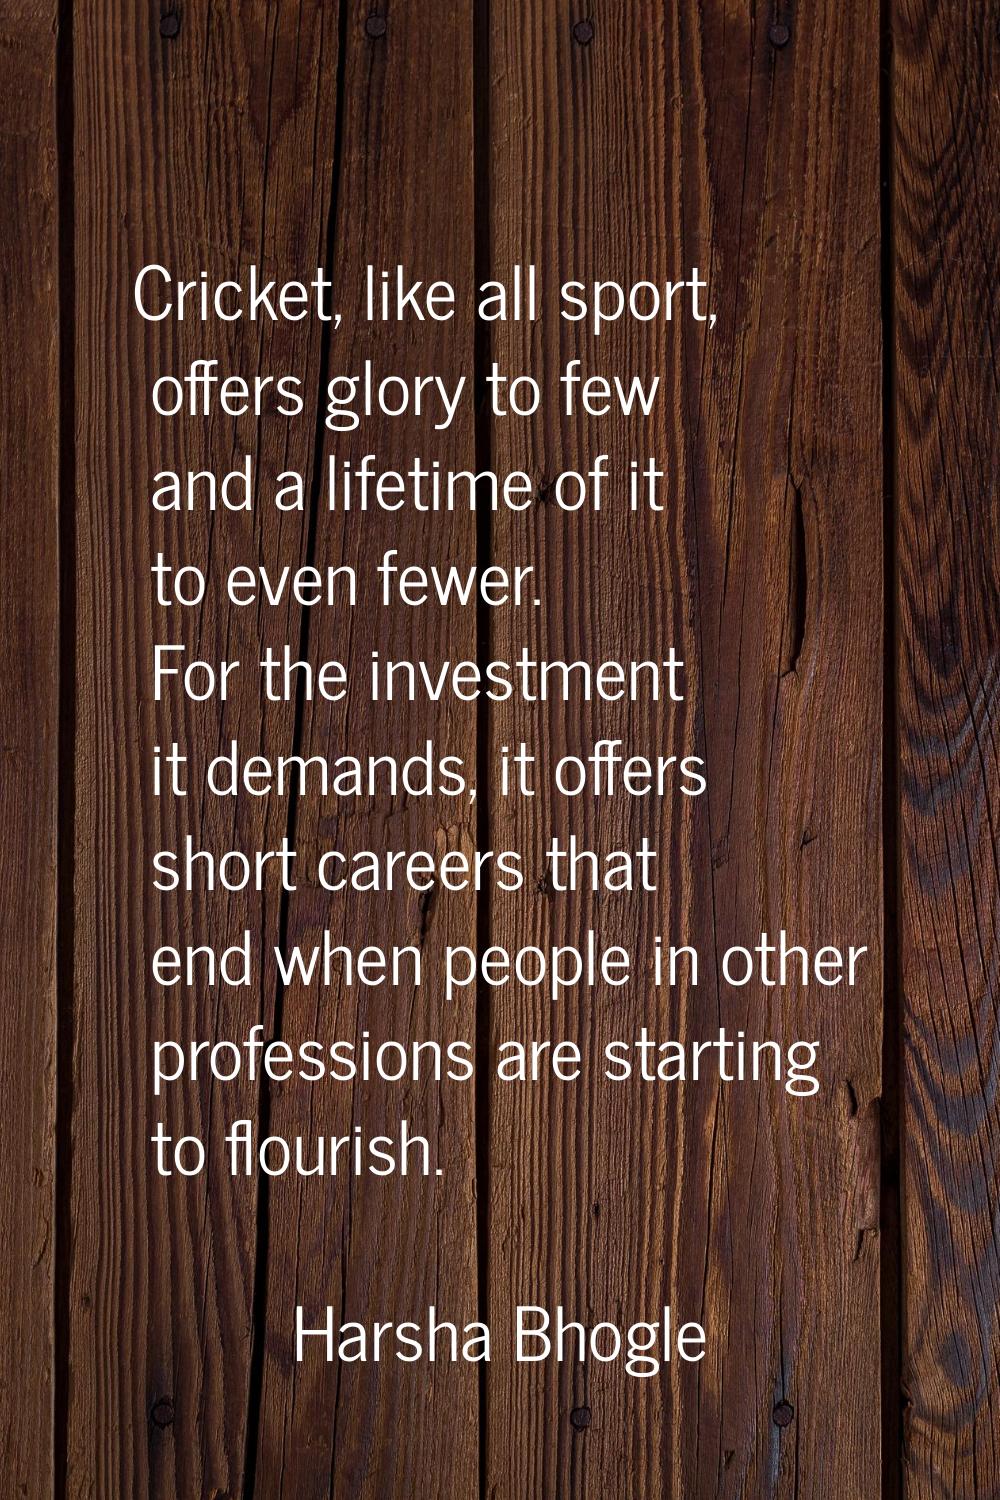 Cricket, like all sport, offers glory to few and a lifetime of it to even fewer. For the investment